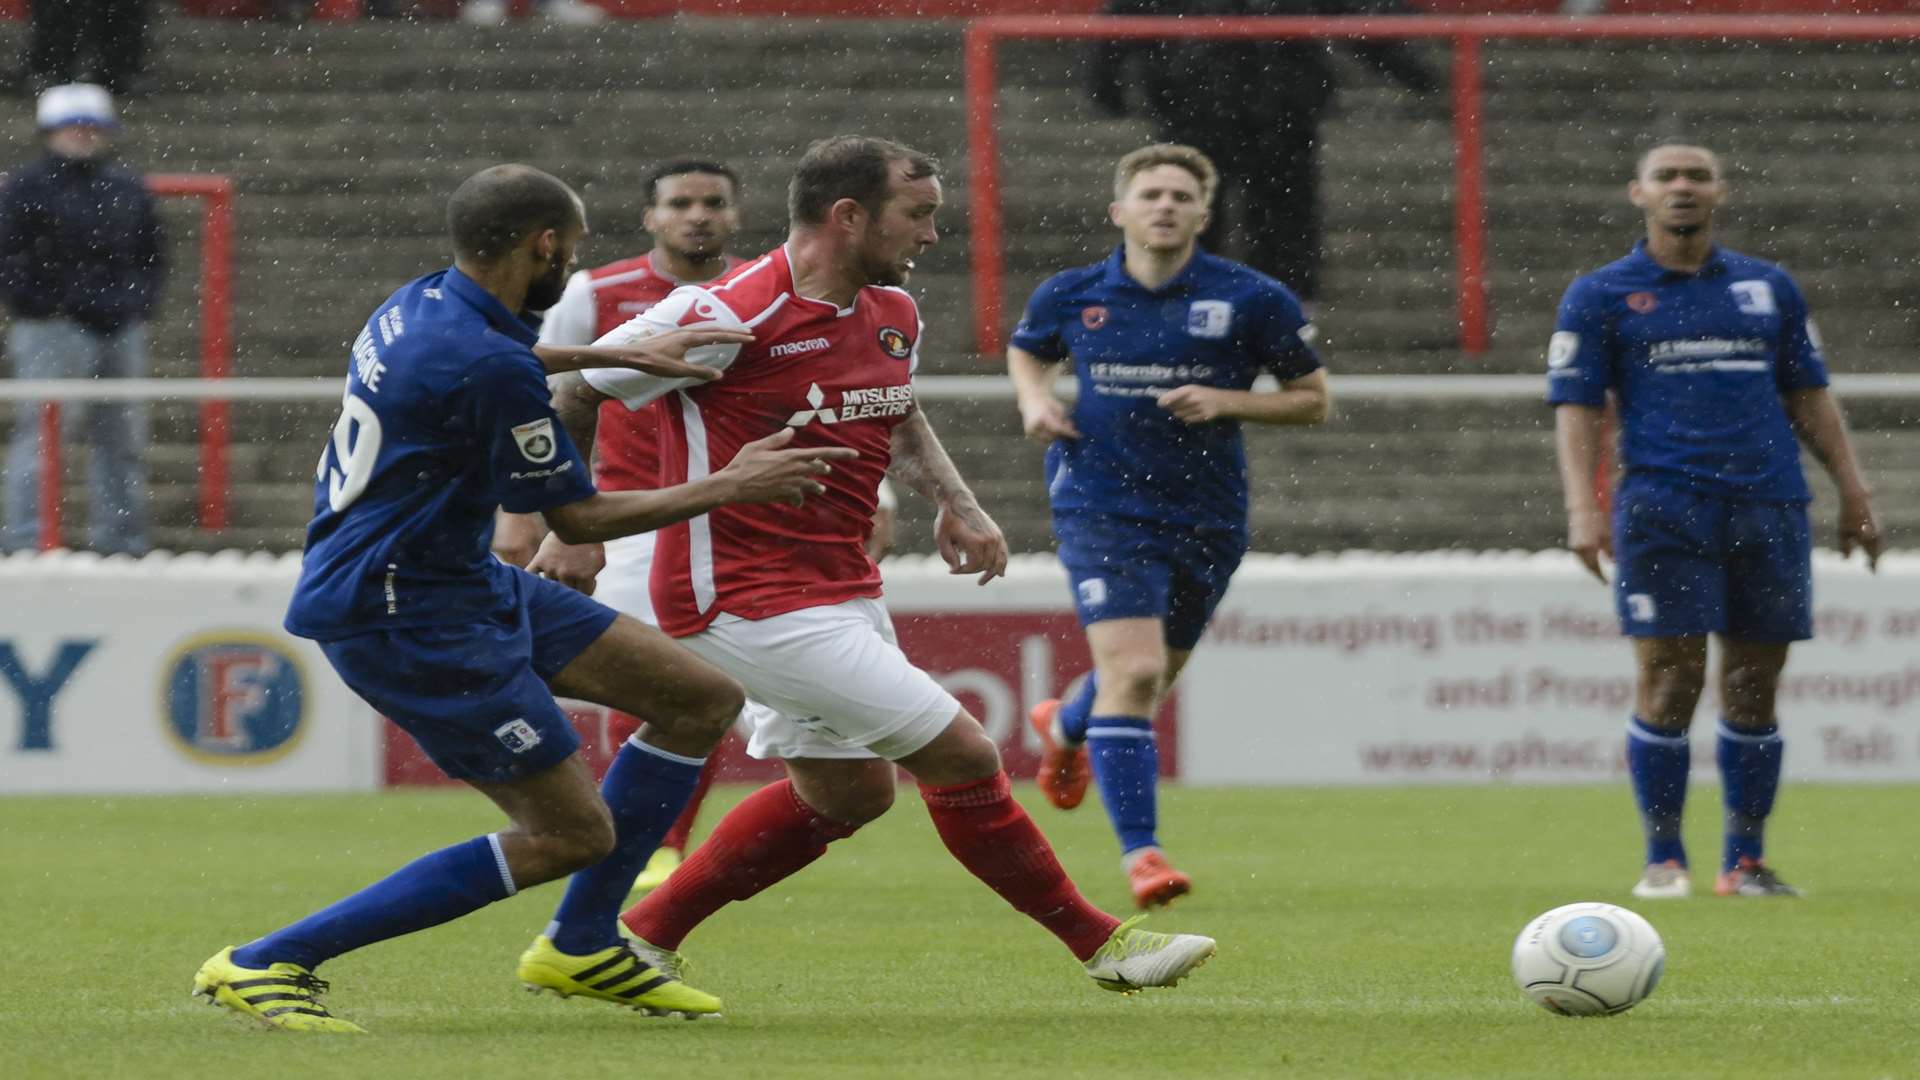 Danny Kedwell set up two of Ebbsfleet's three goals Picture: Andy Payton